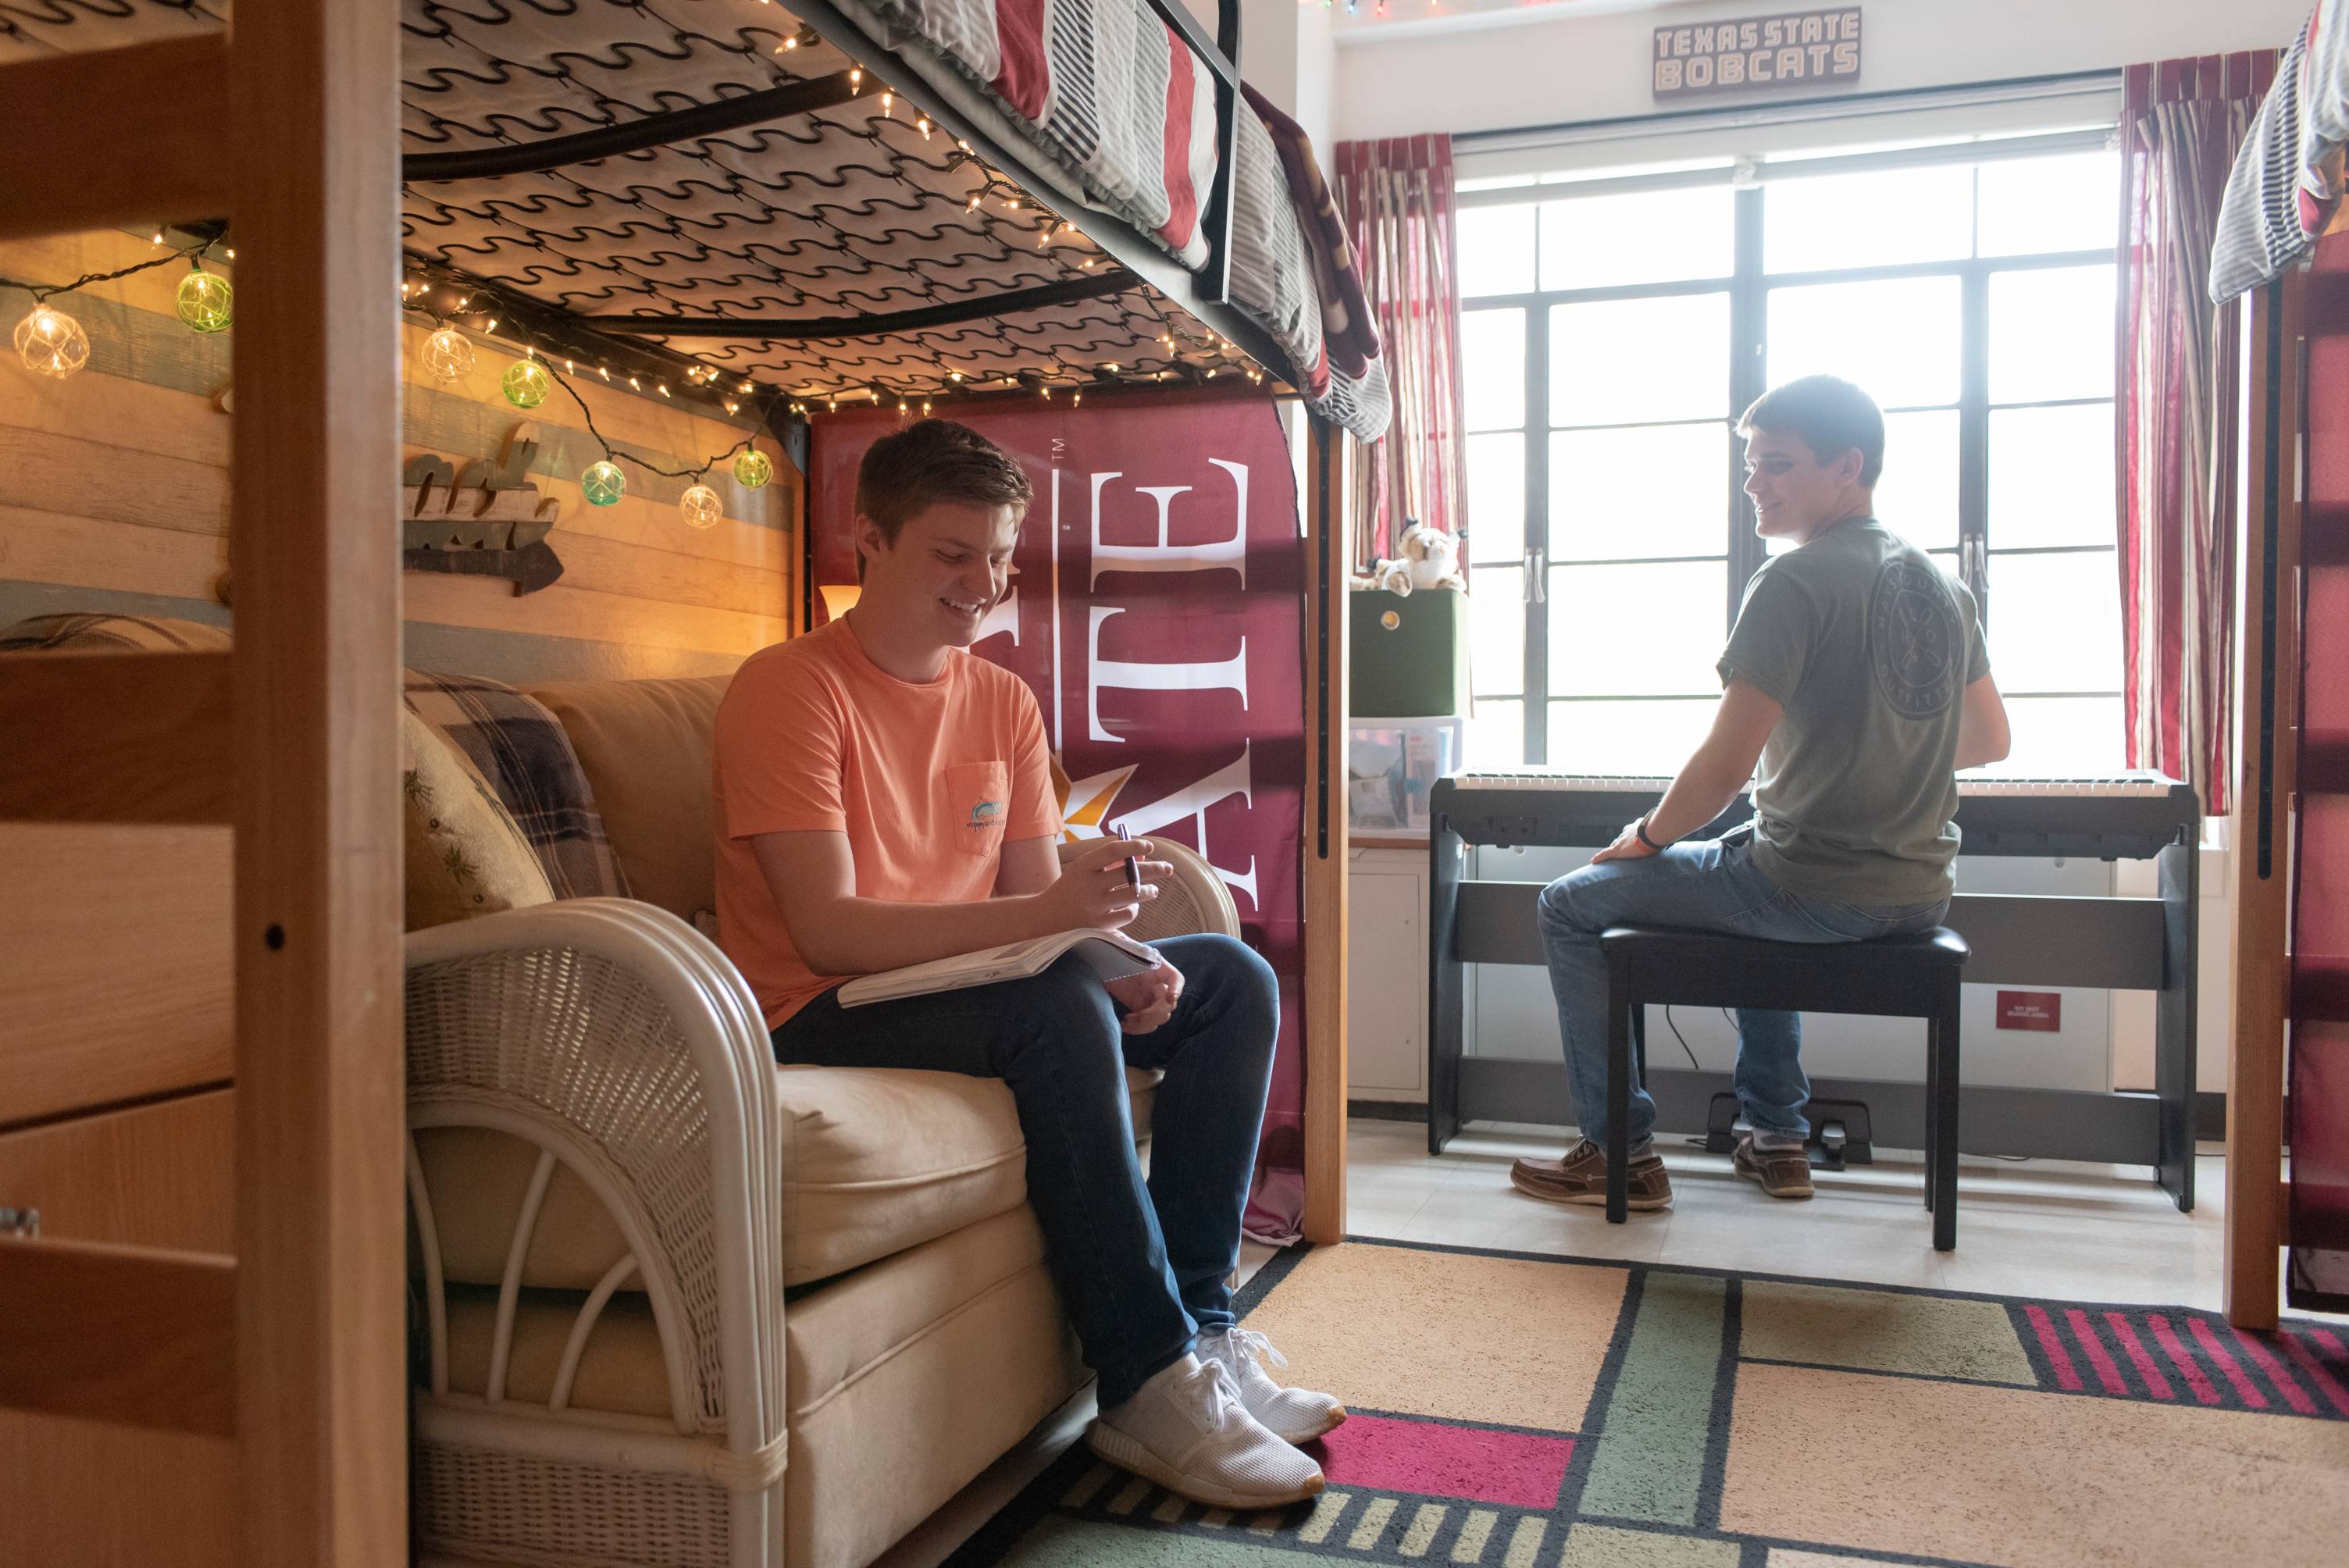 students in dorm room